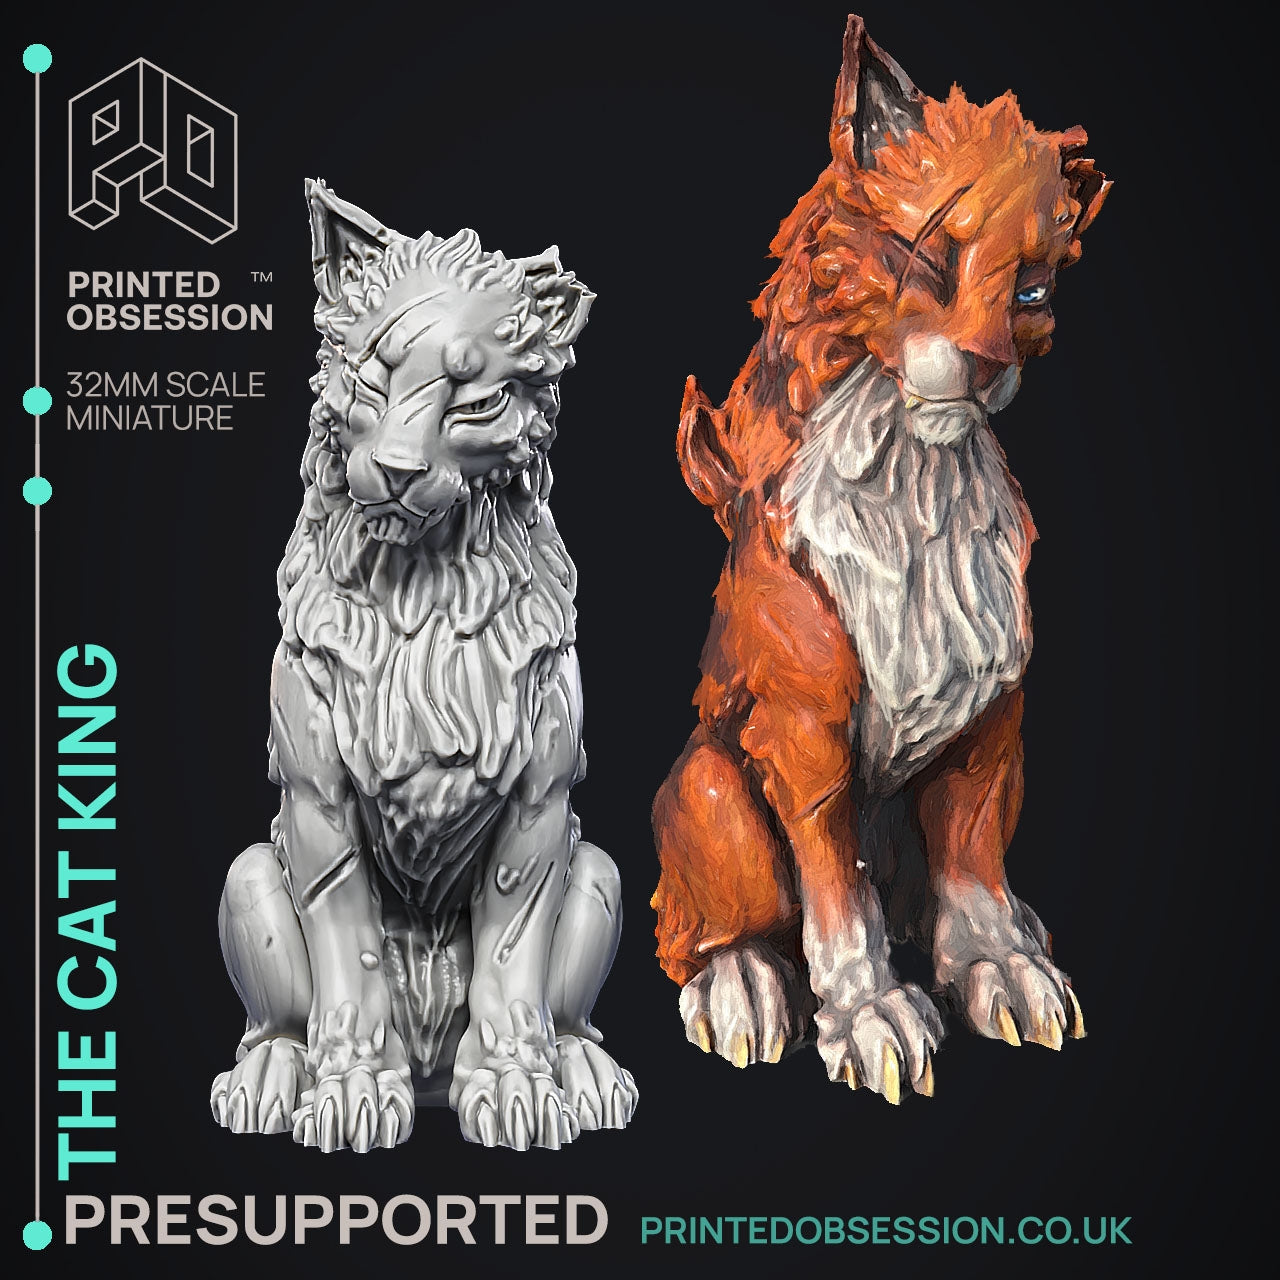 The Cat King - The Discus World - The Printed Obsession - Table-top mini, 3D Printed Collectable for painting and playing!